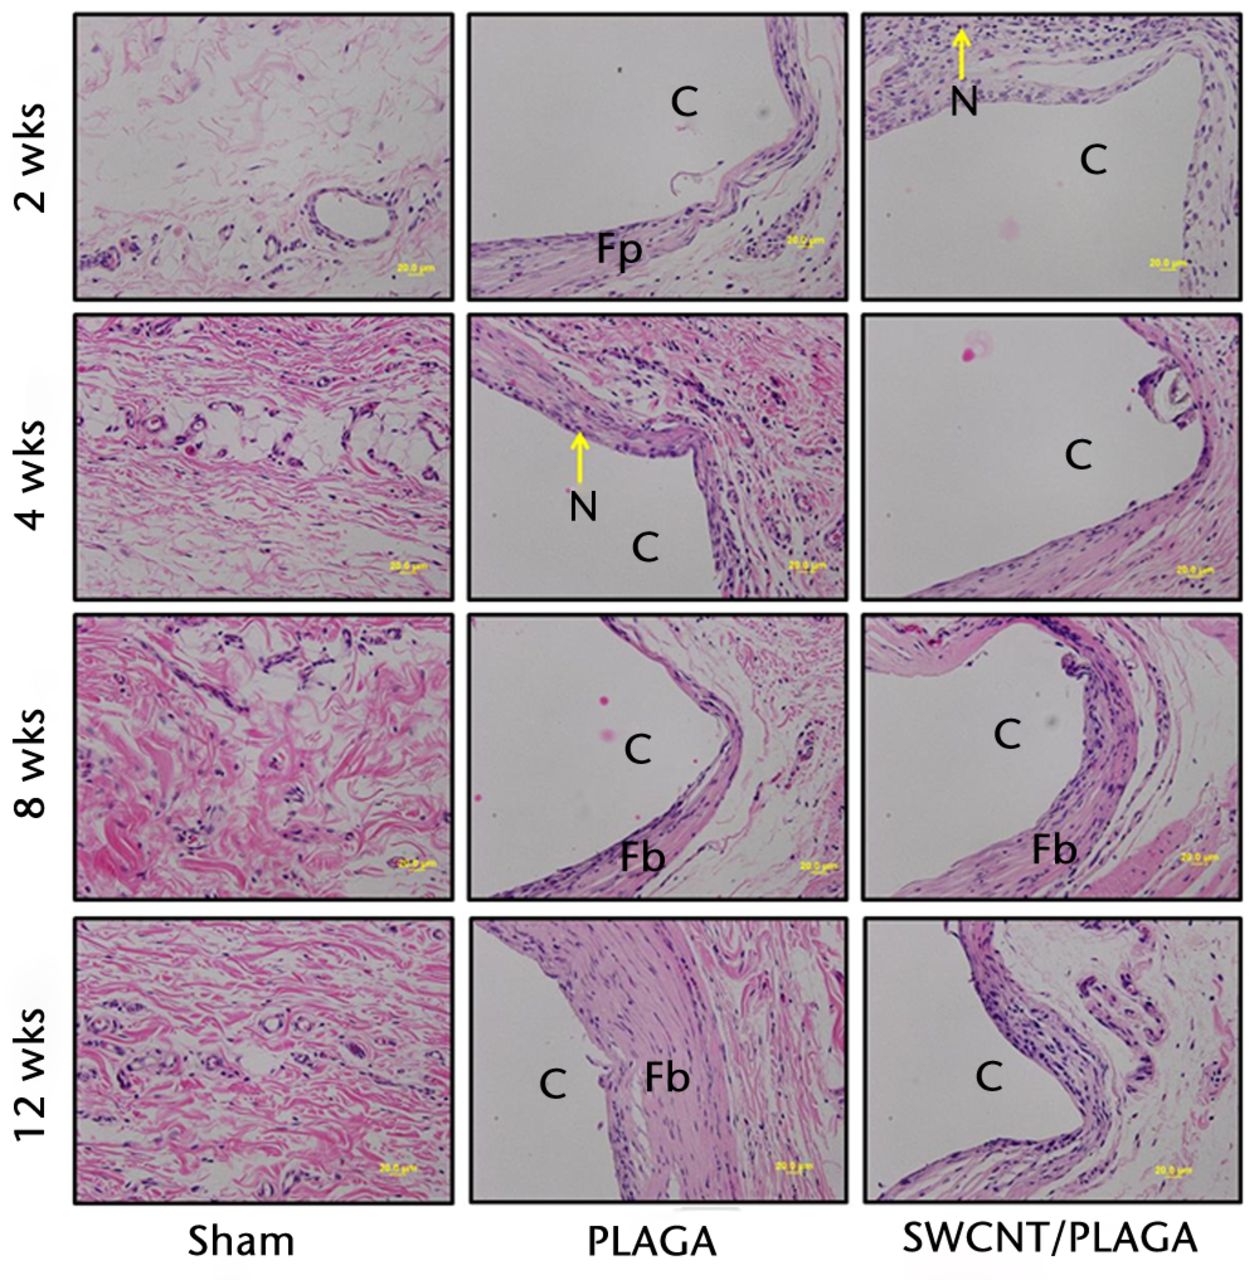 Fig. 7 
            Micrograph of subcutaneous skin tissues
of rats implanted with Sham, poly (lactic-co-glycolic acid) (PLAGA)
and single-walled carbon nanotubes (SWCNT)/PLAGA at two, four, eight
and 12 weeks post-implantation stained with haematoxylin and eosin (×20
magnification). C, composite (PLAGA or SWCNT/PLAGA) implant site;
M, muscular tissue; N, polymorphonuclear neutrophils; Fp, fibroplasia;
Fb, fibrosis.
          